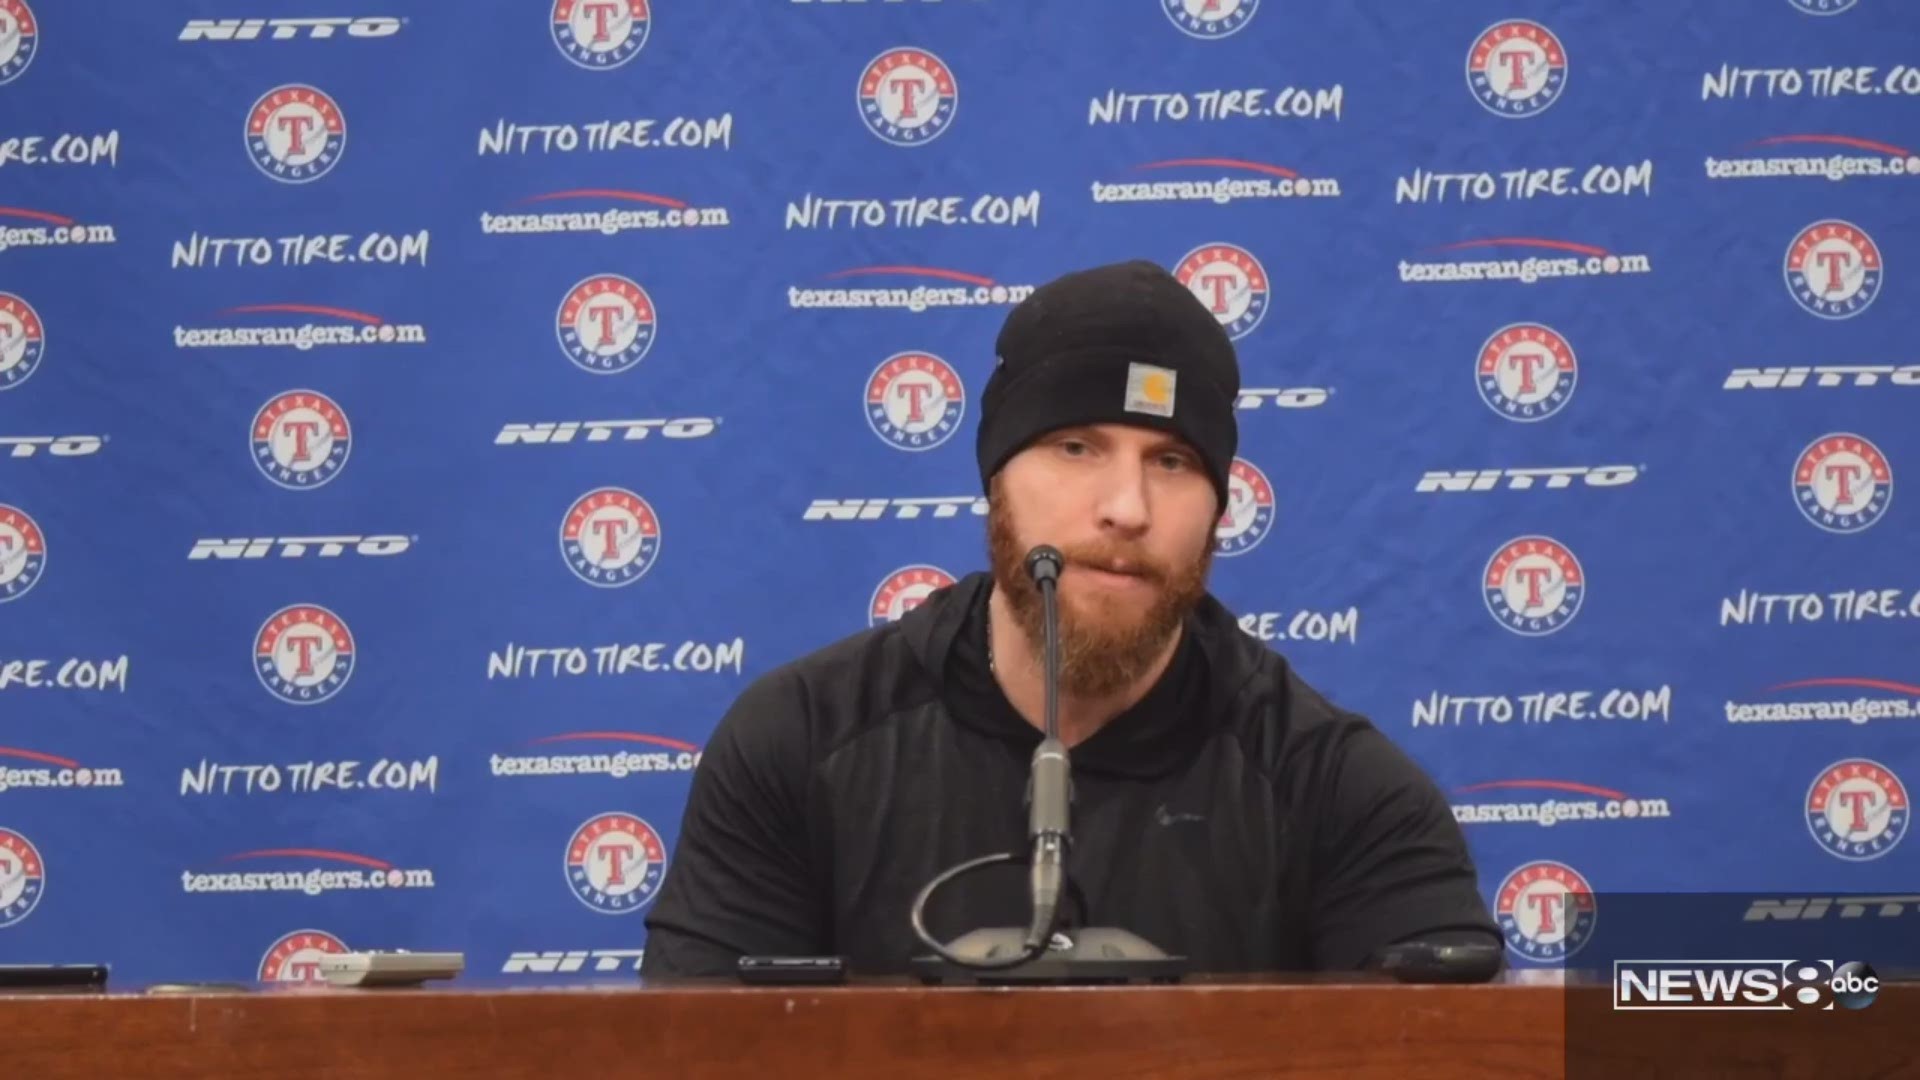 Josh Hamilton recalls Spring Training from 2007, when "every day mattered," and says that mentality is back. WFAA.com